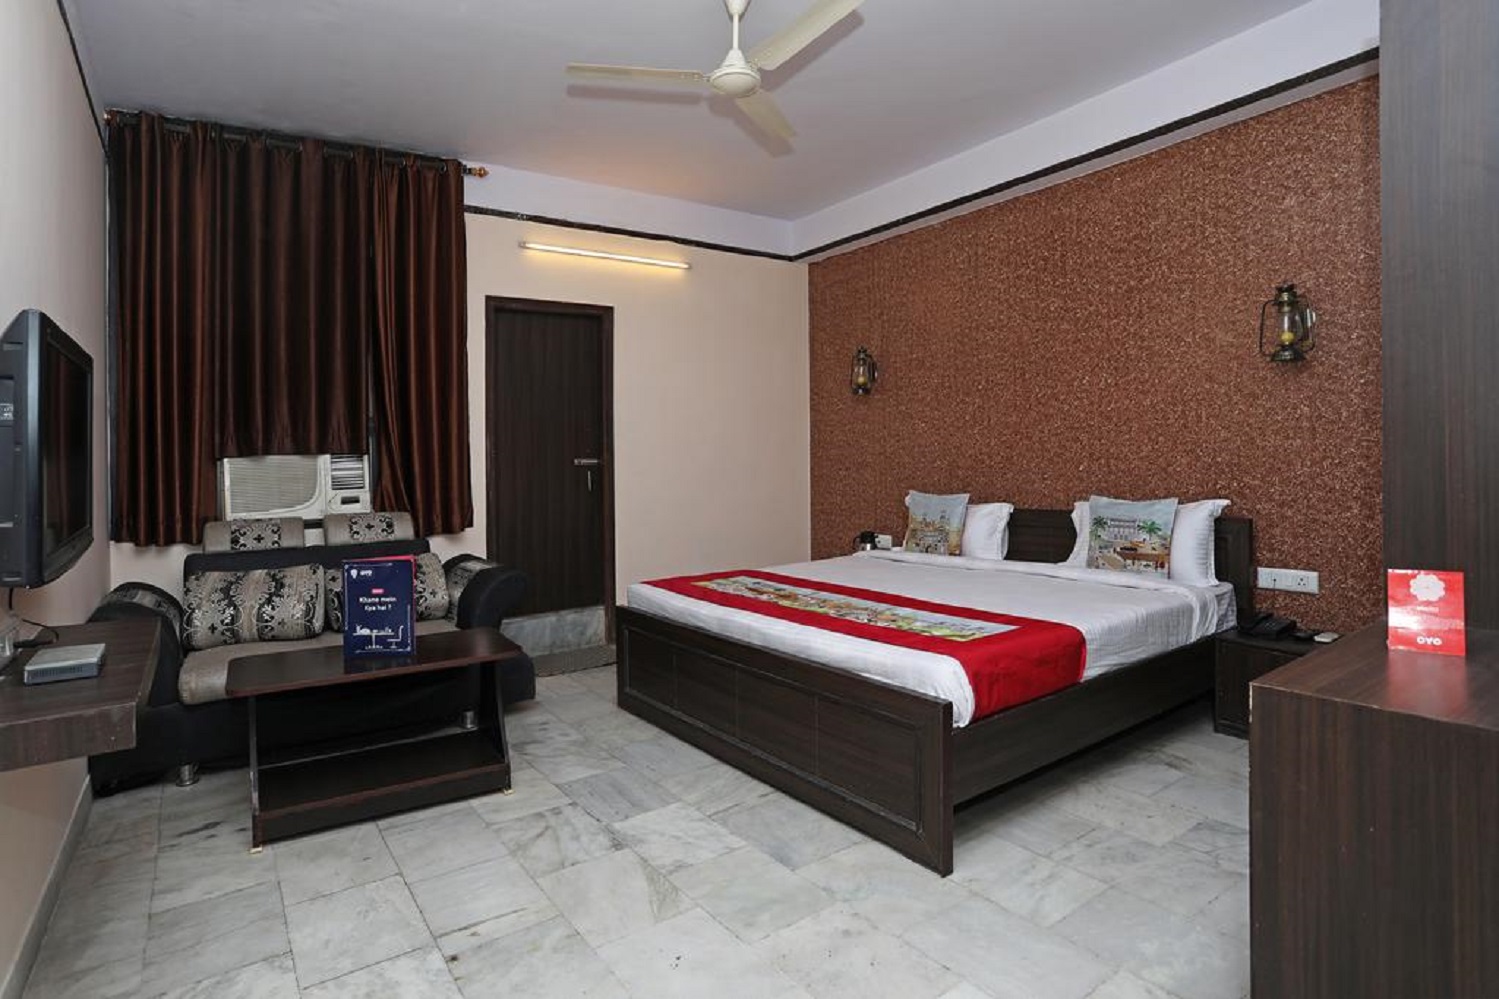 Hotel Anand Palace